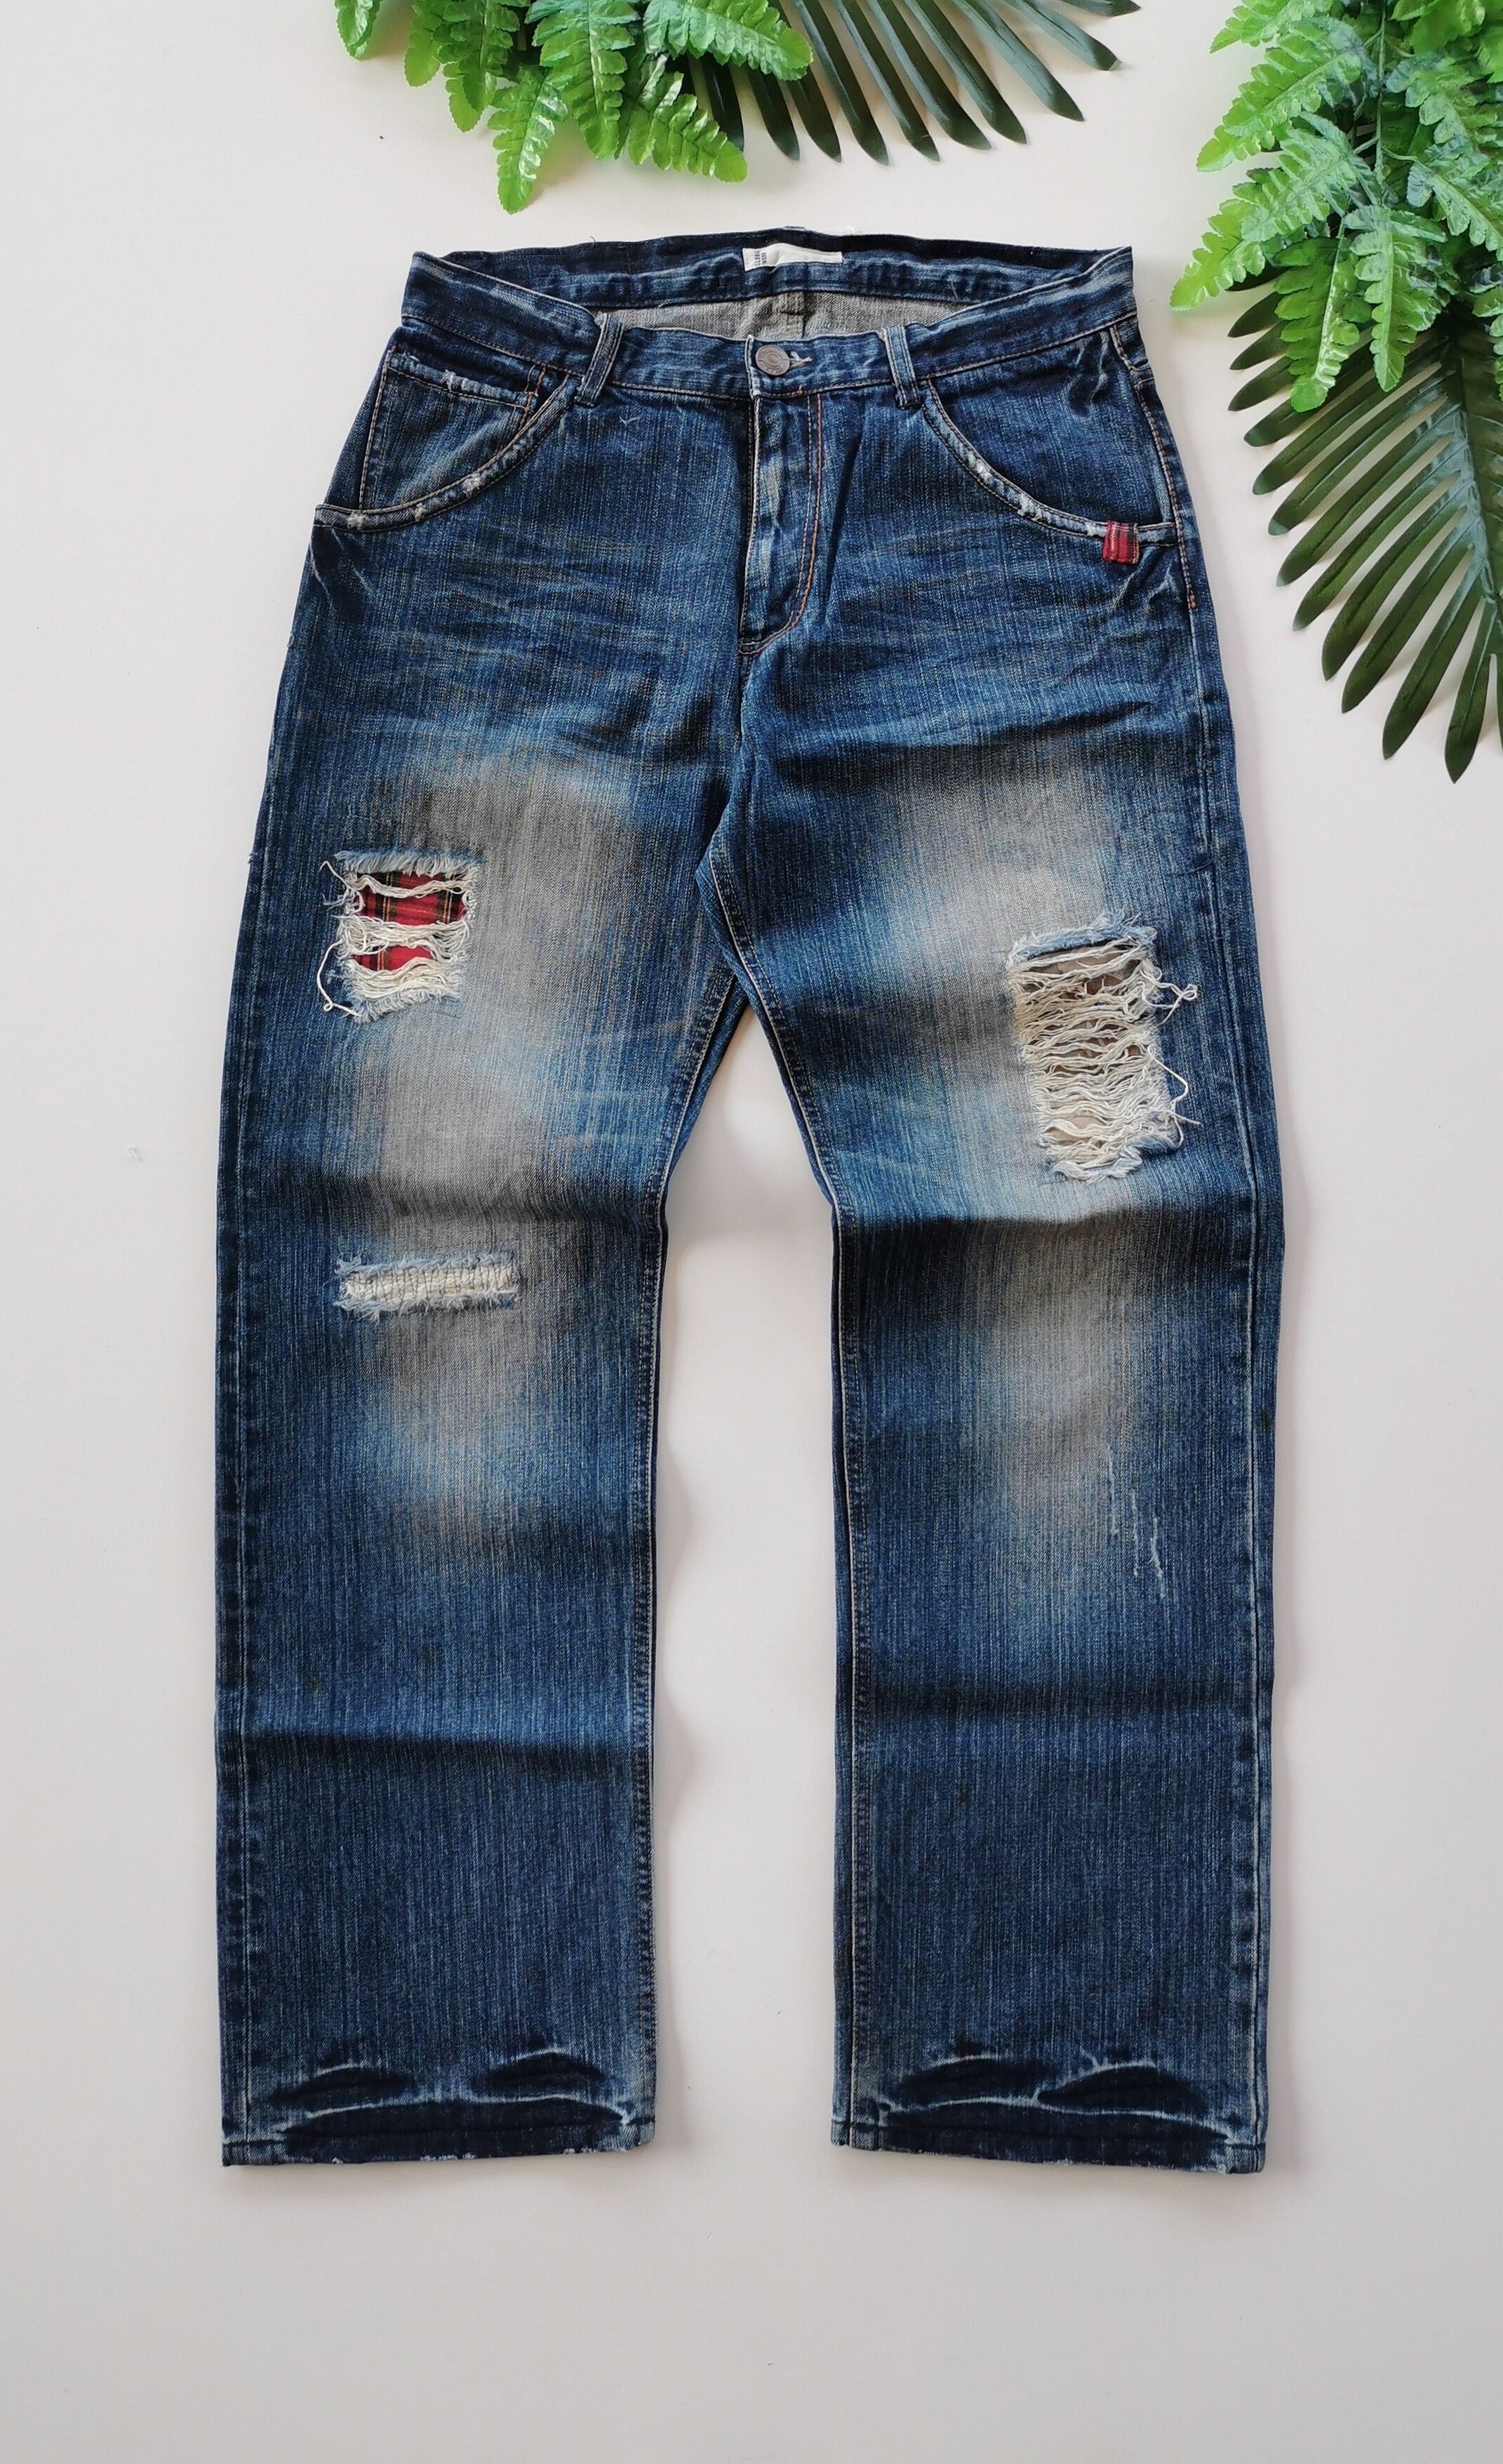 Hysteric Glamour Global Work Japan Distressed Tartanlooklike HystericGlamour Size US 33 - 2 Preview